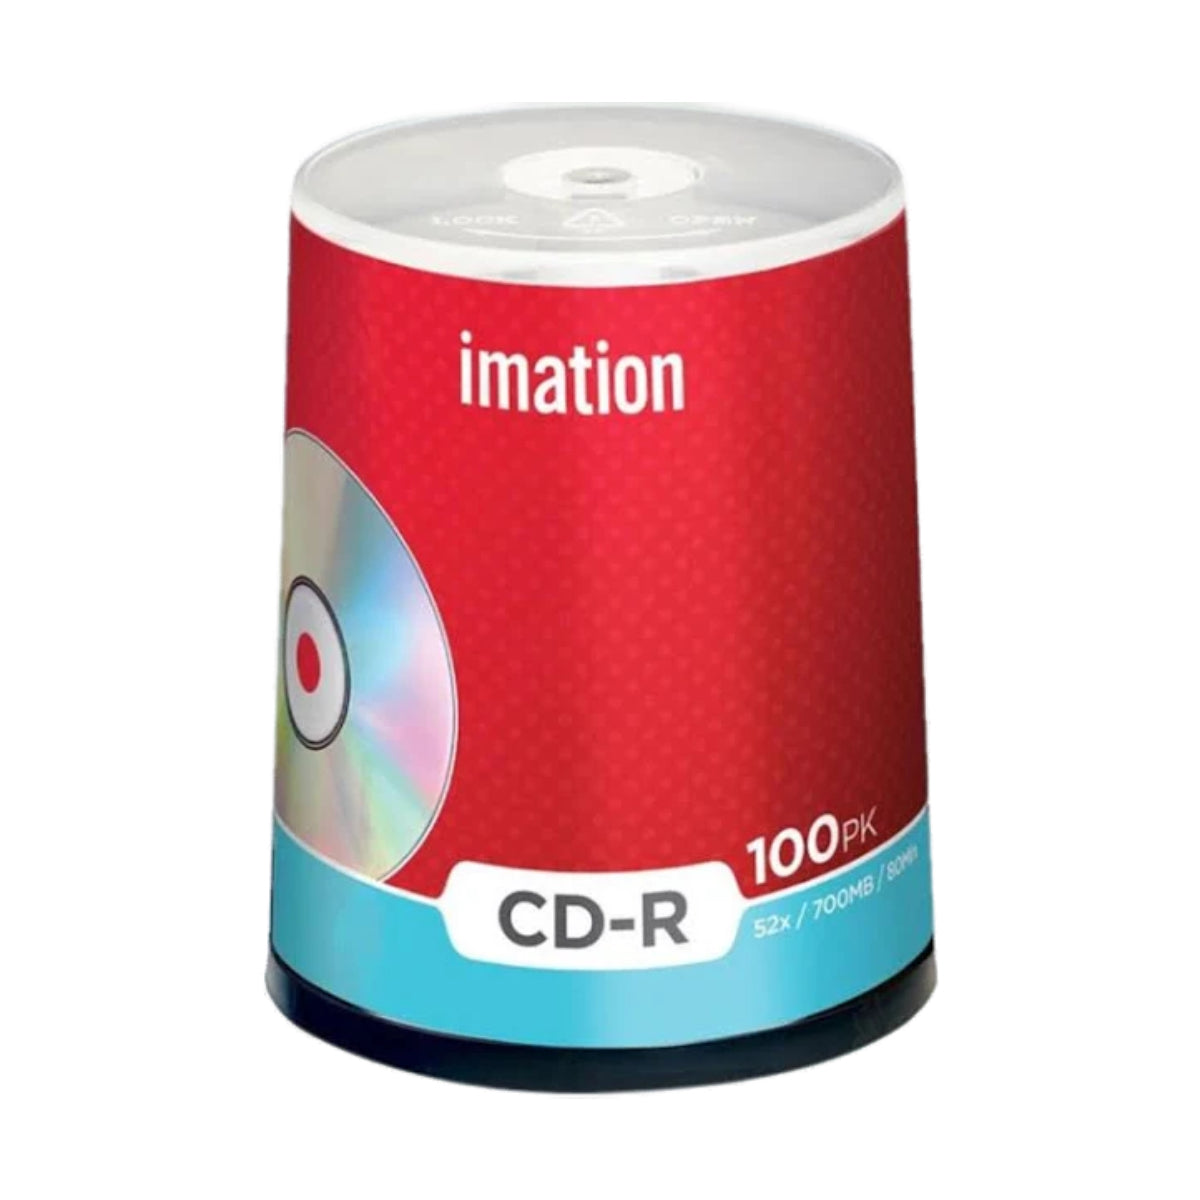 Imation CD-R, 52x / 700MB / 80Min, 100/spindle